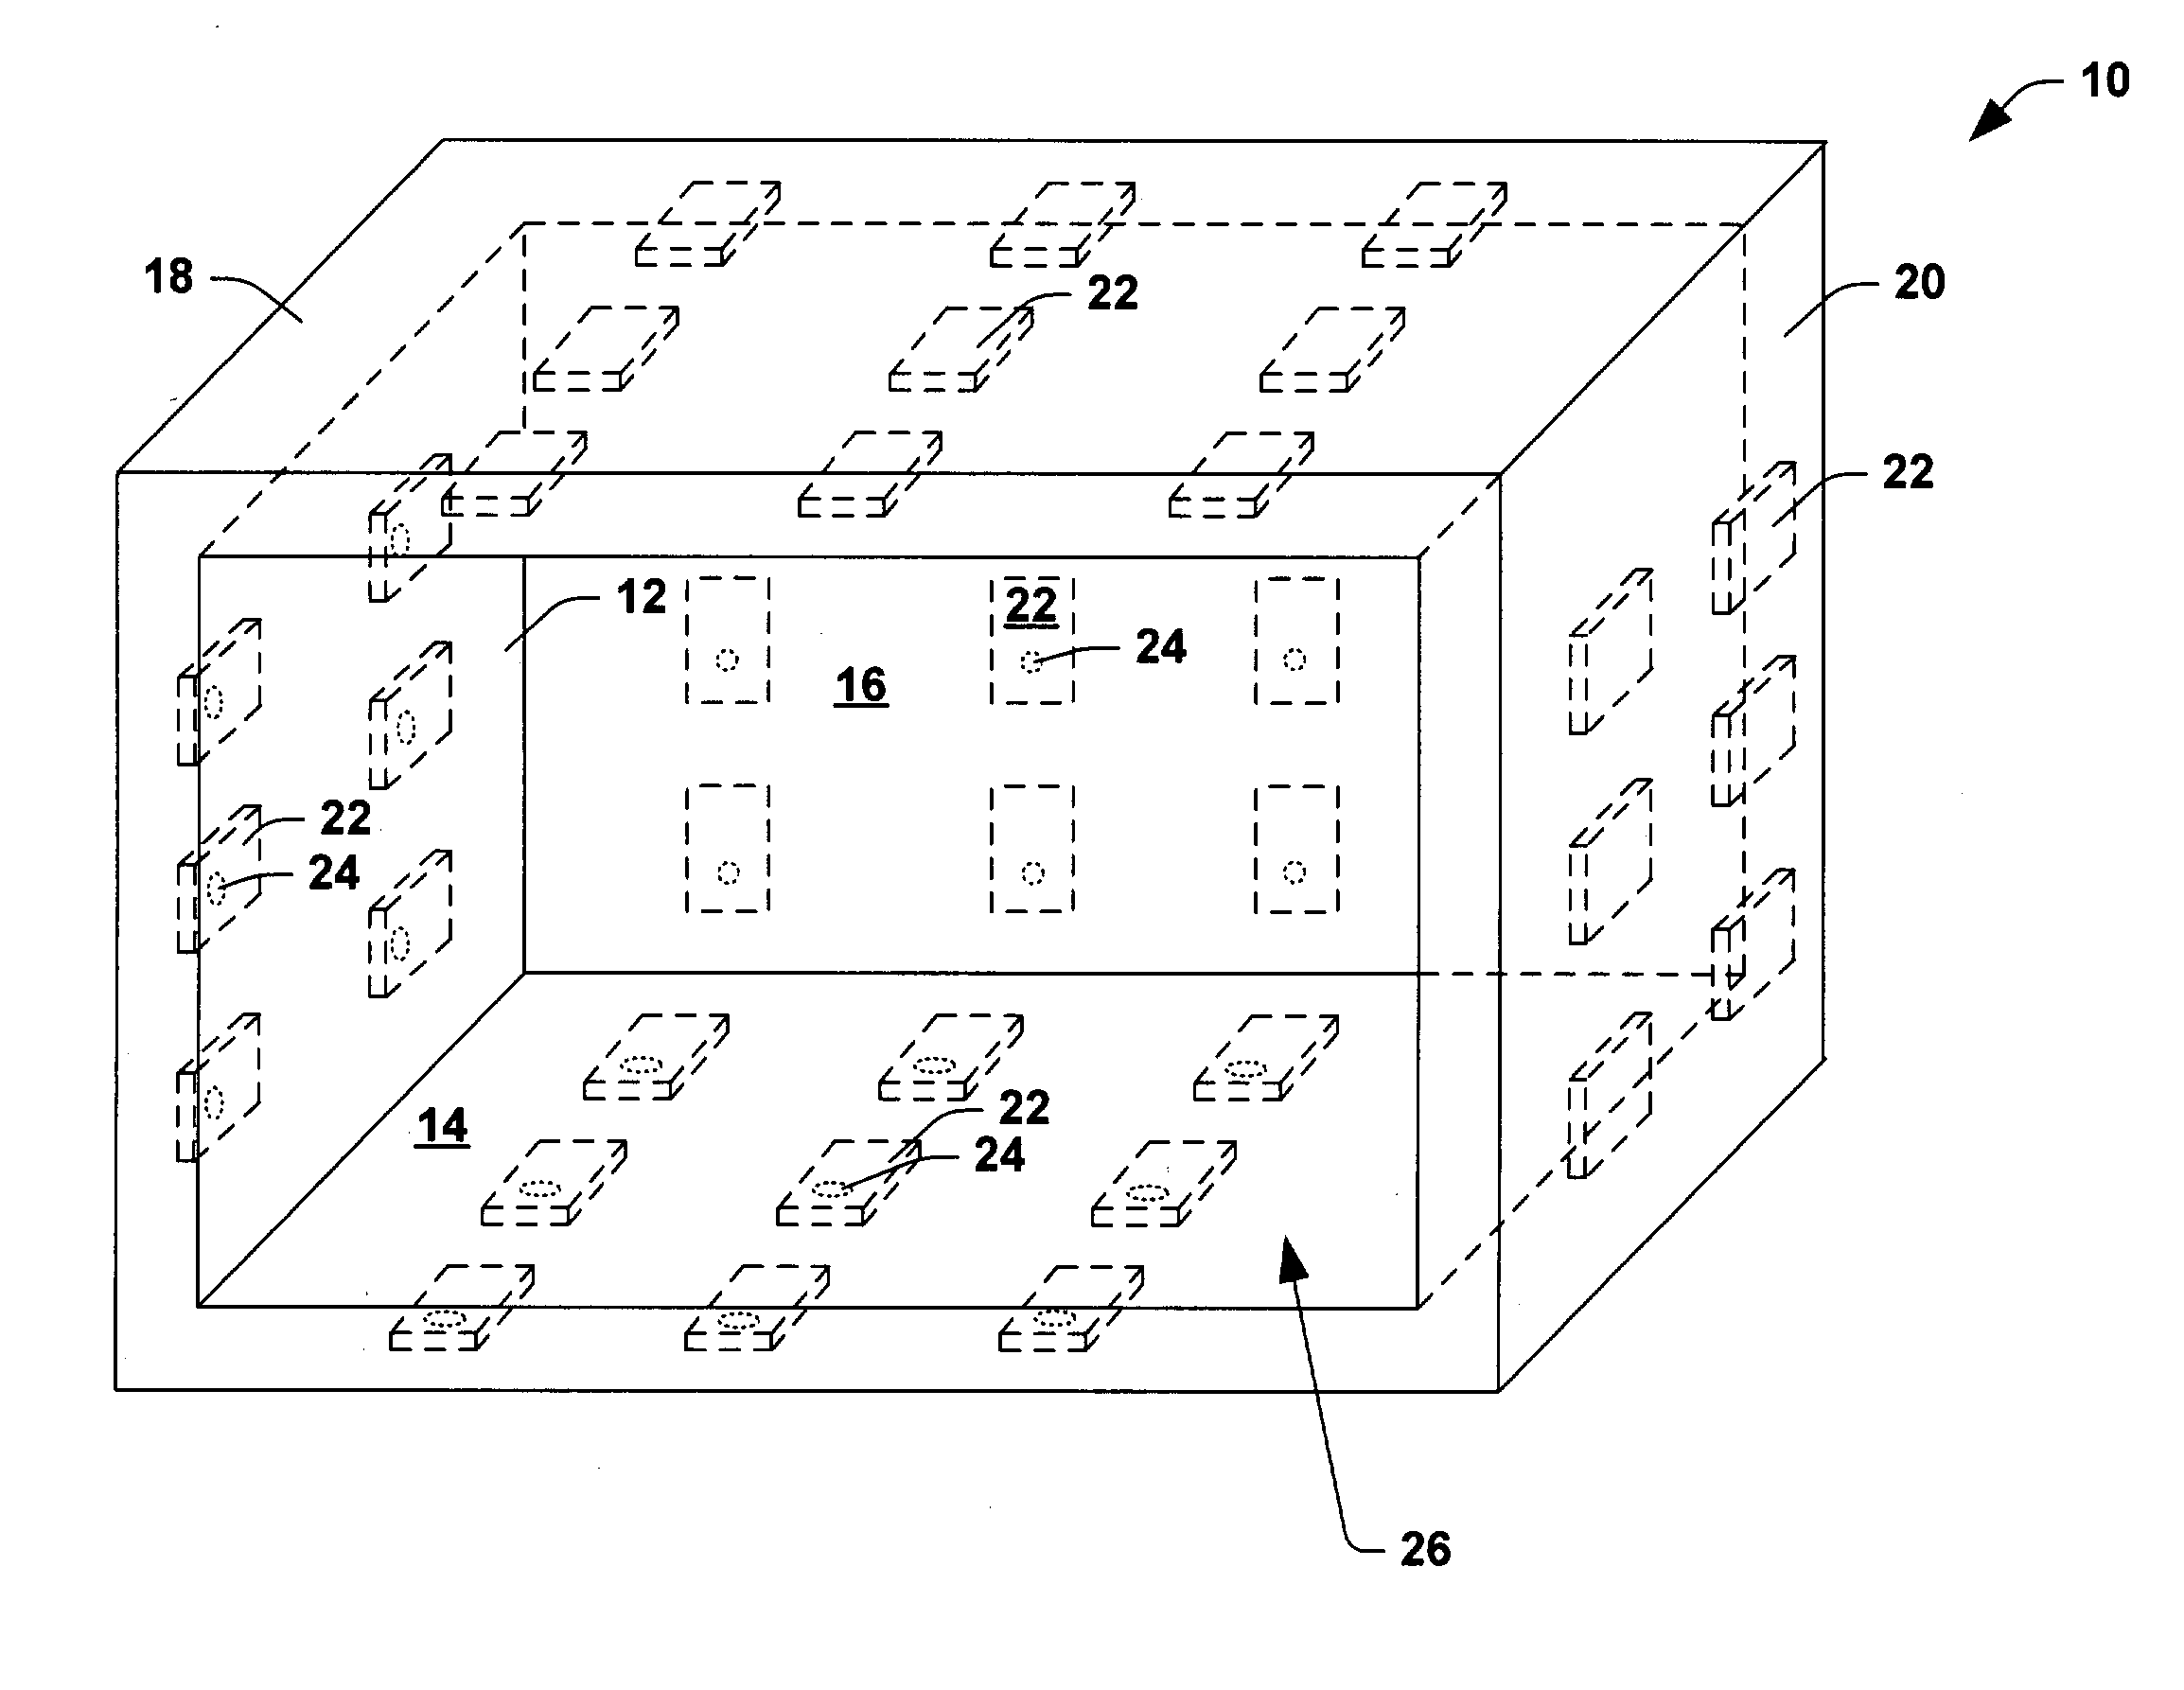 Microwave heating using distributed semiconductor sources